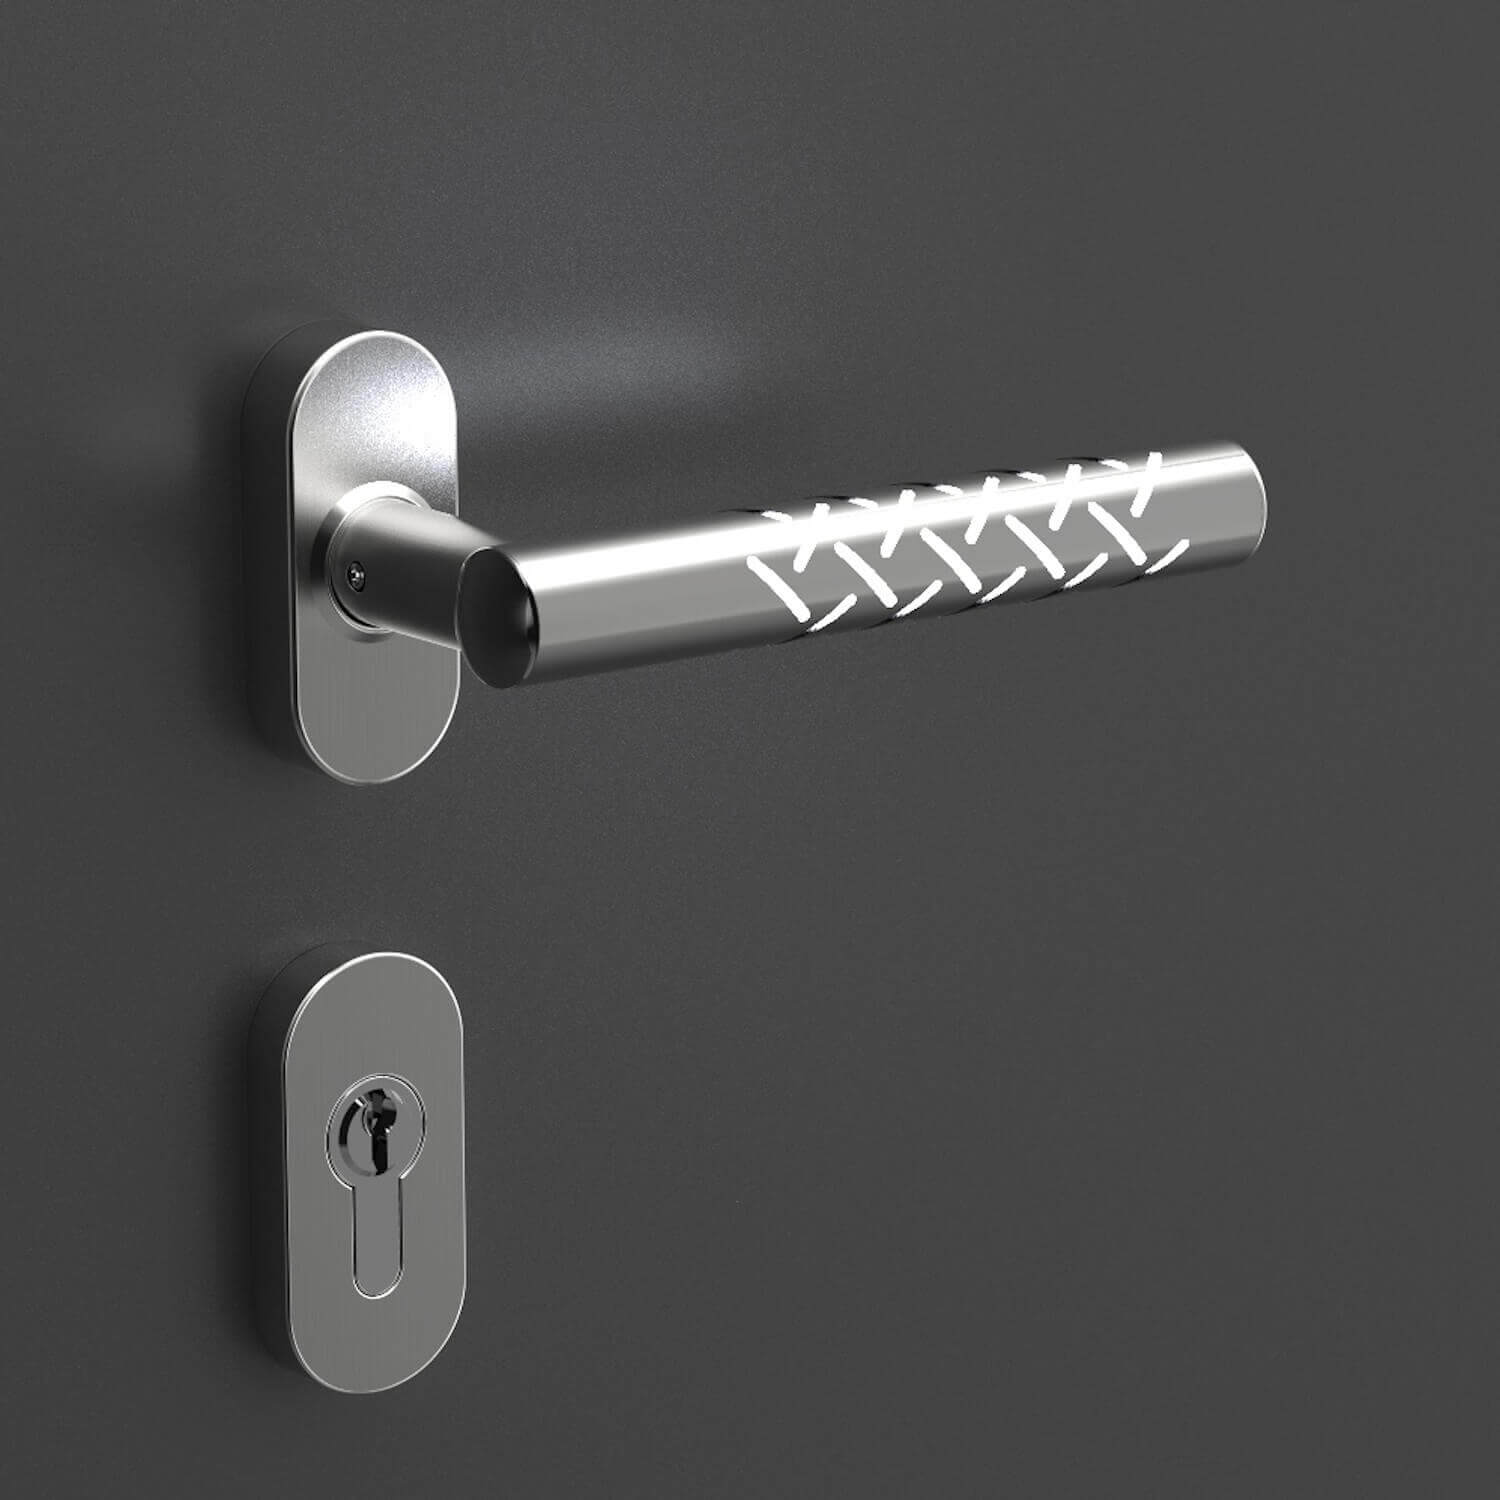 Round front door inside handle made of stainless steel